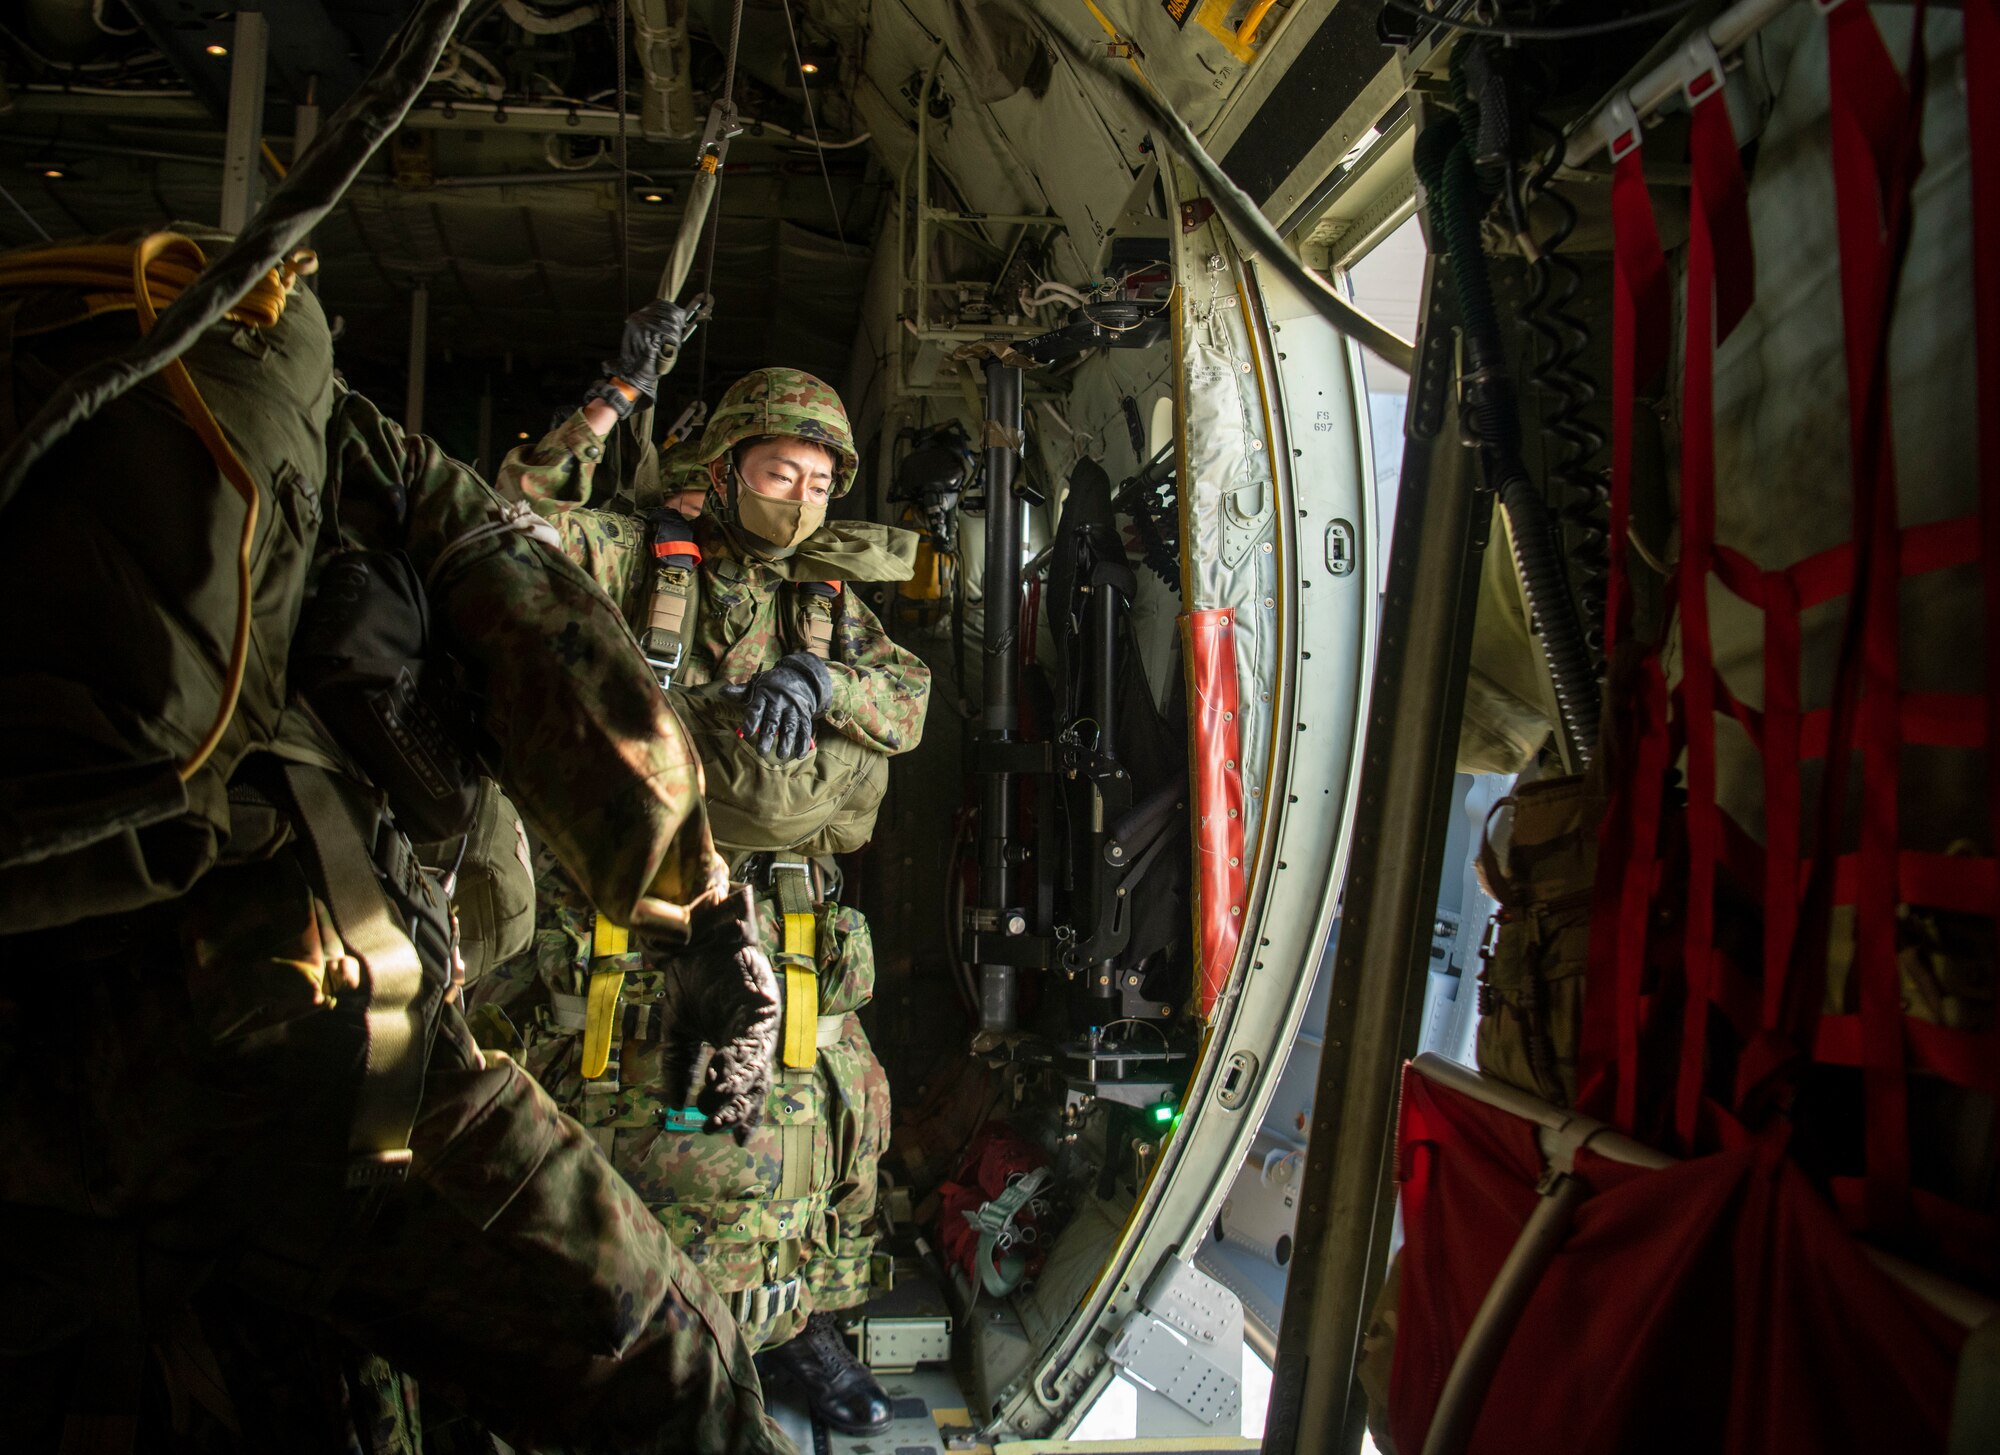 Japan Ground Self-Defense Force paratroopers assigned to the 1st Airborne Brigade jump out of a 36th Airlift Squadron C-130J Hercules over Narashino drop zone, Chiba, Japan